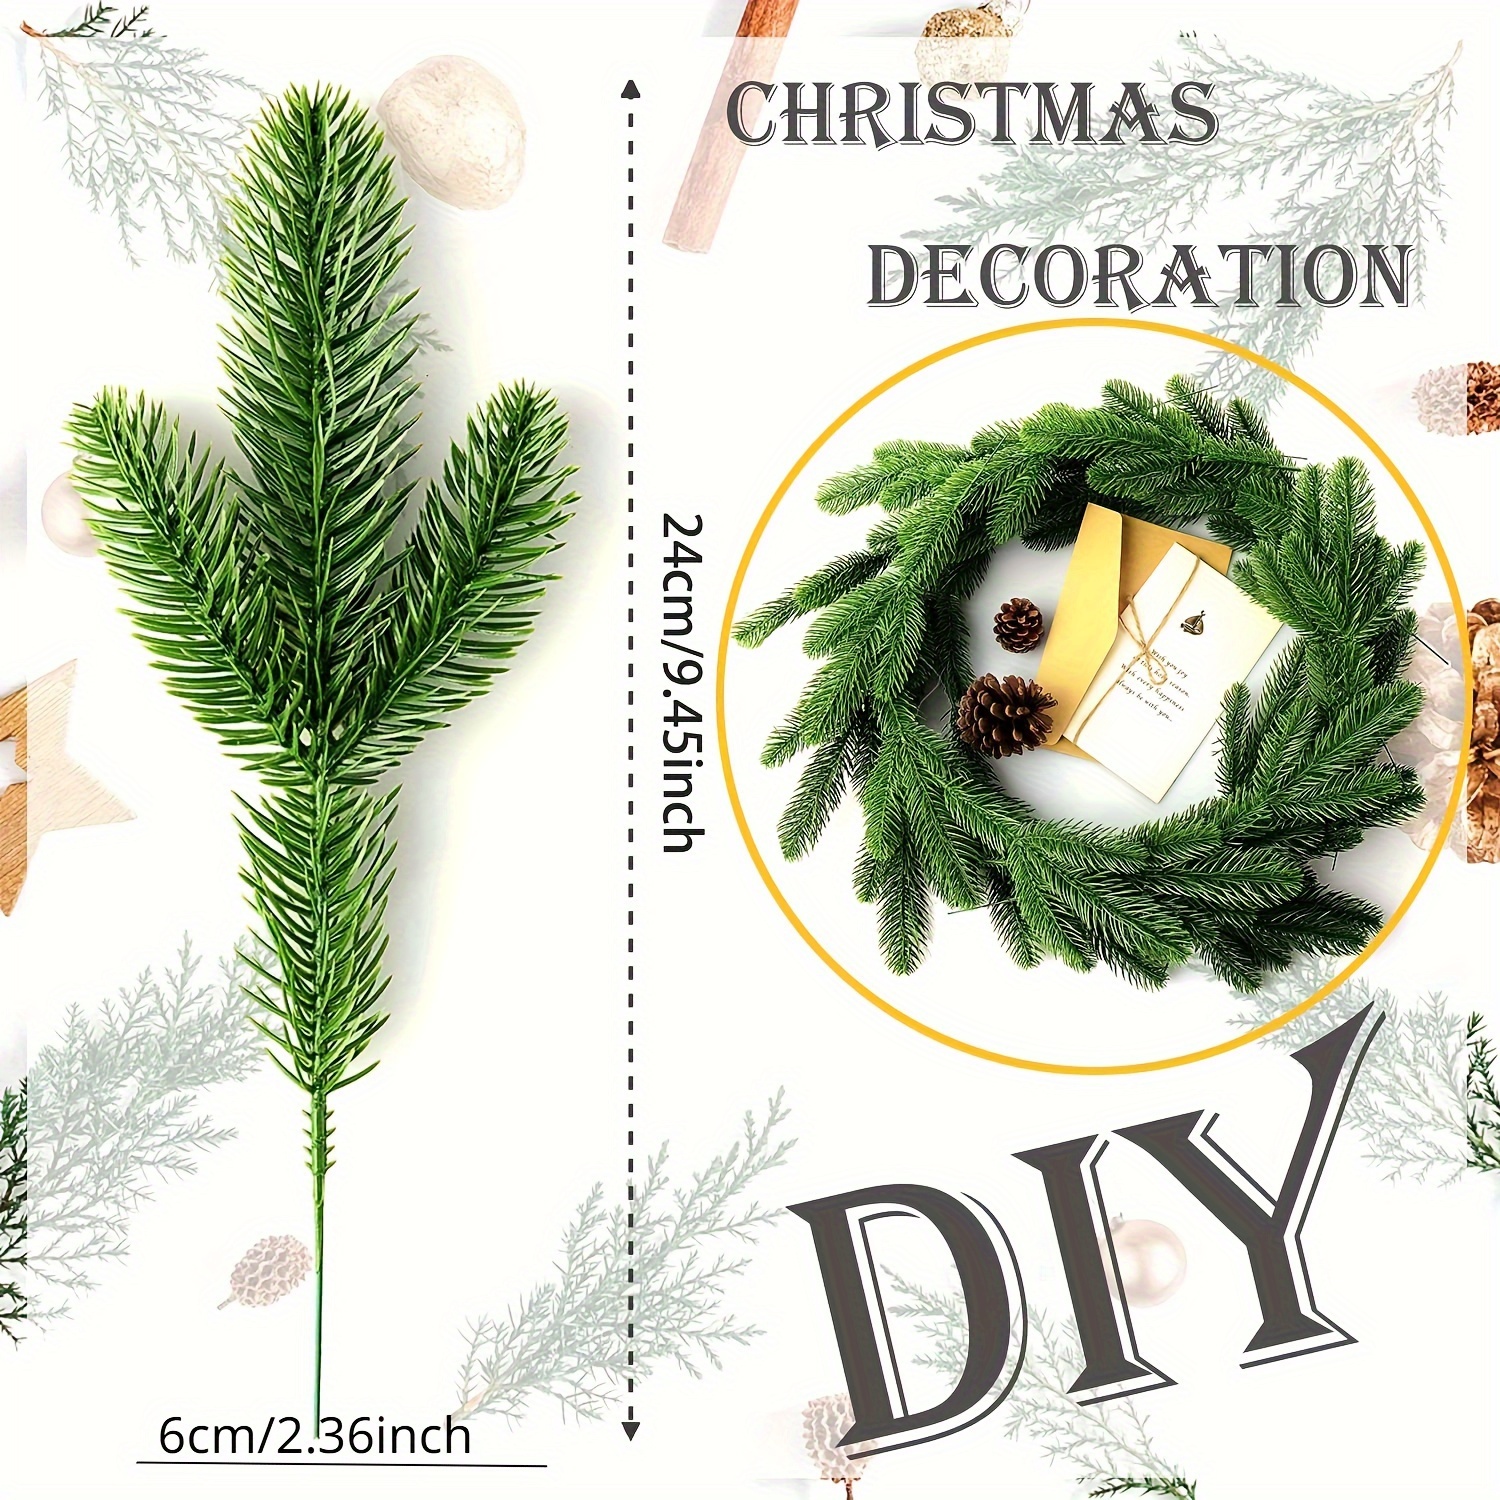 30pcs Artificial Pine Branches Green Leaves Needle,garland Green Plants  Pine Needles For Home Garden Christmas Decoration Diy Craft Wreath